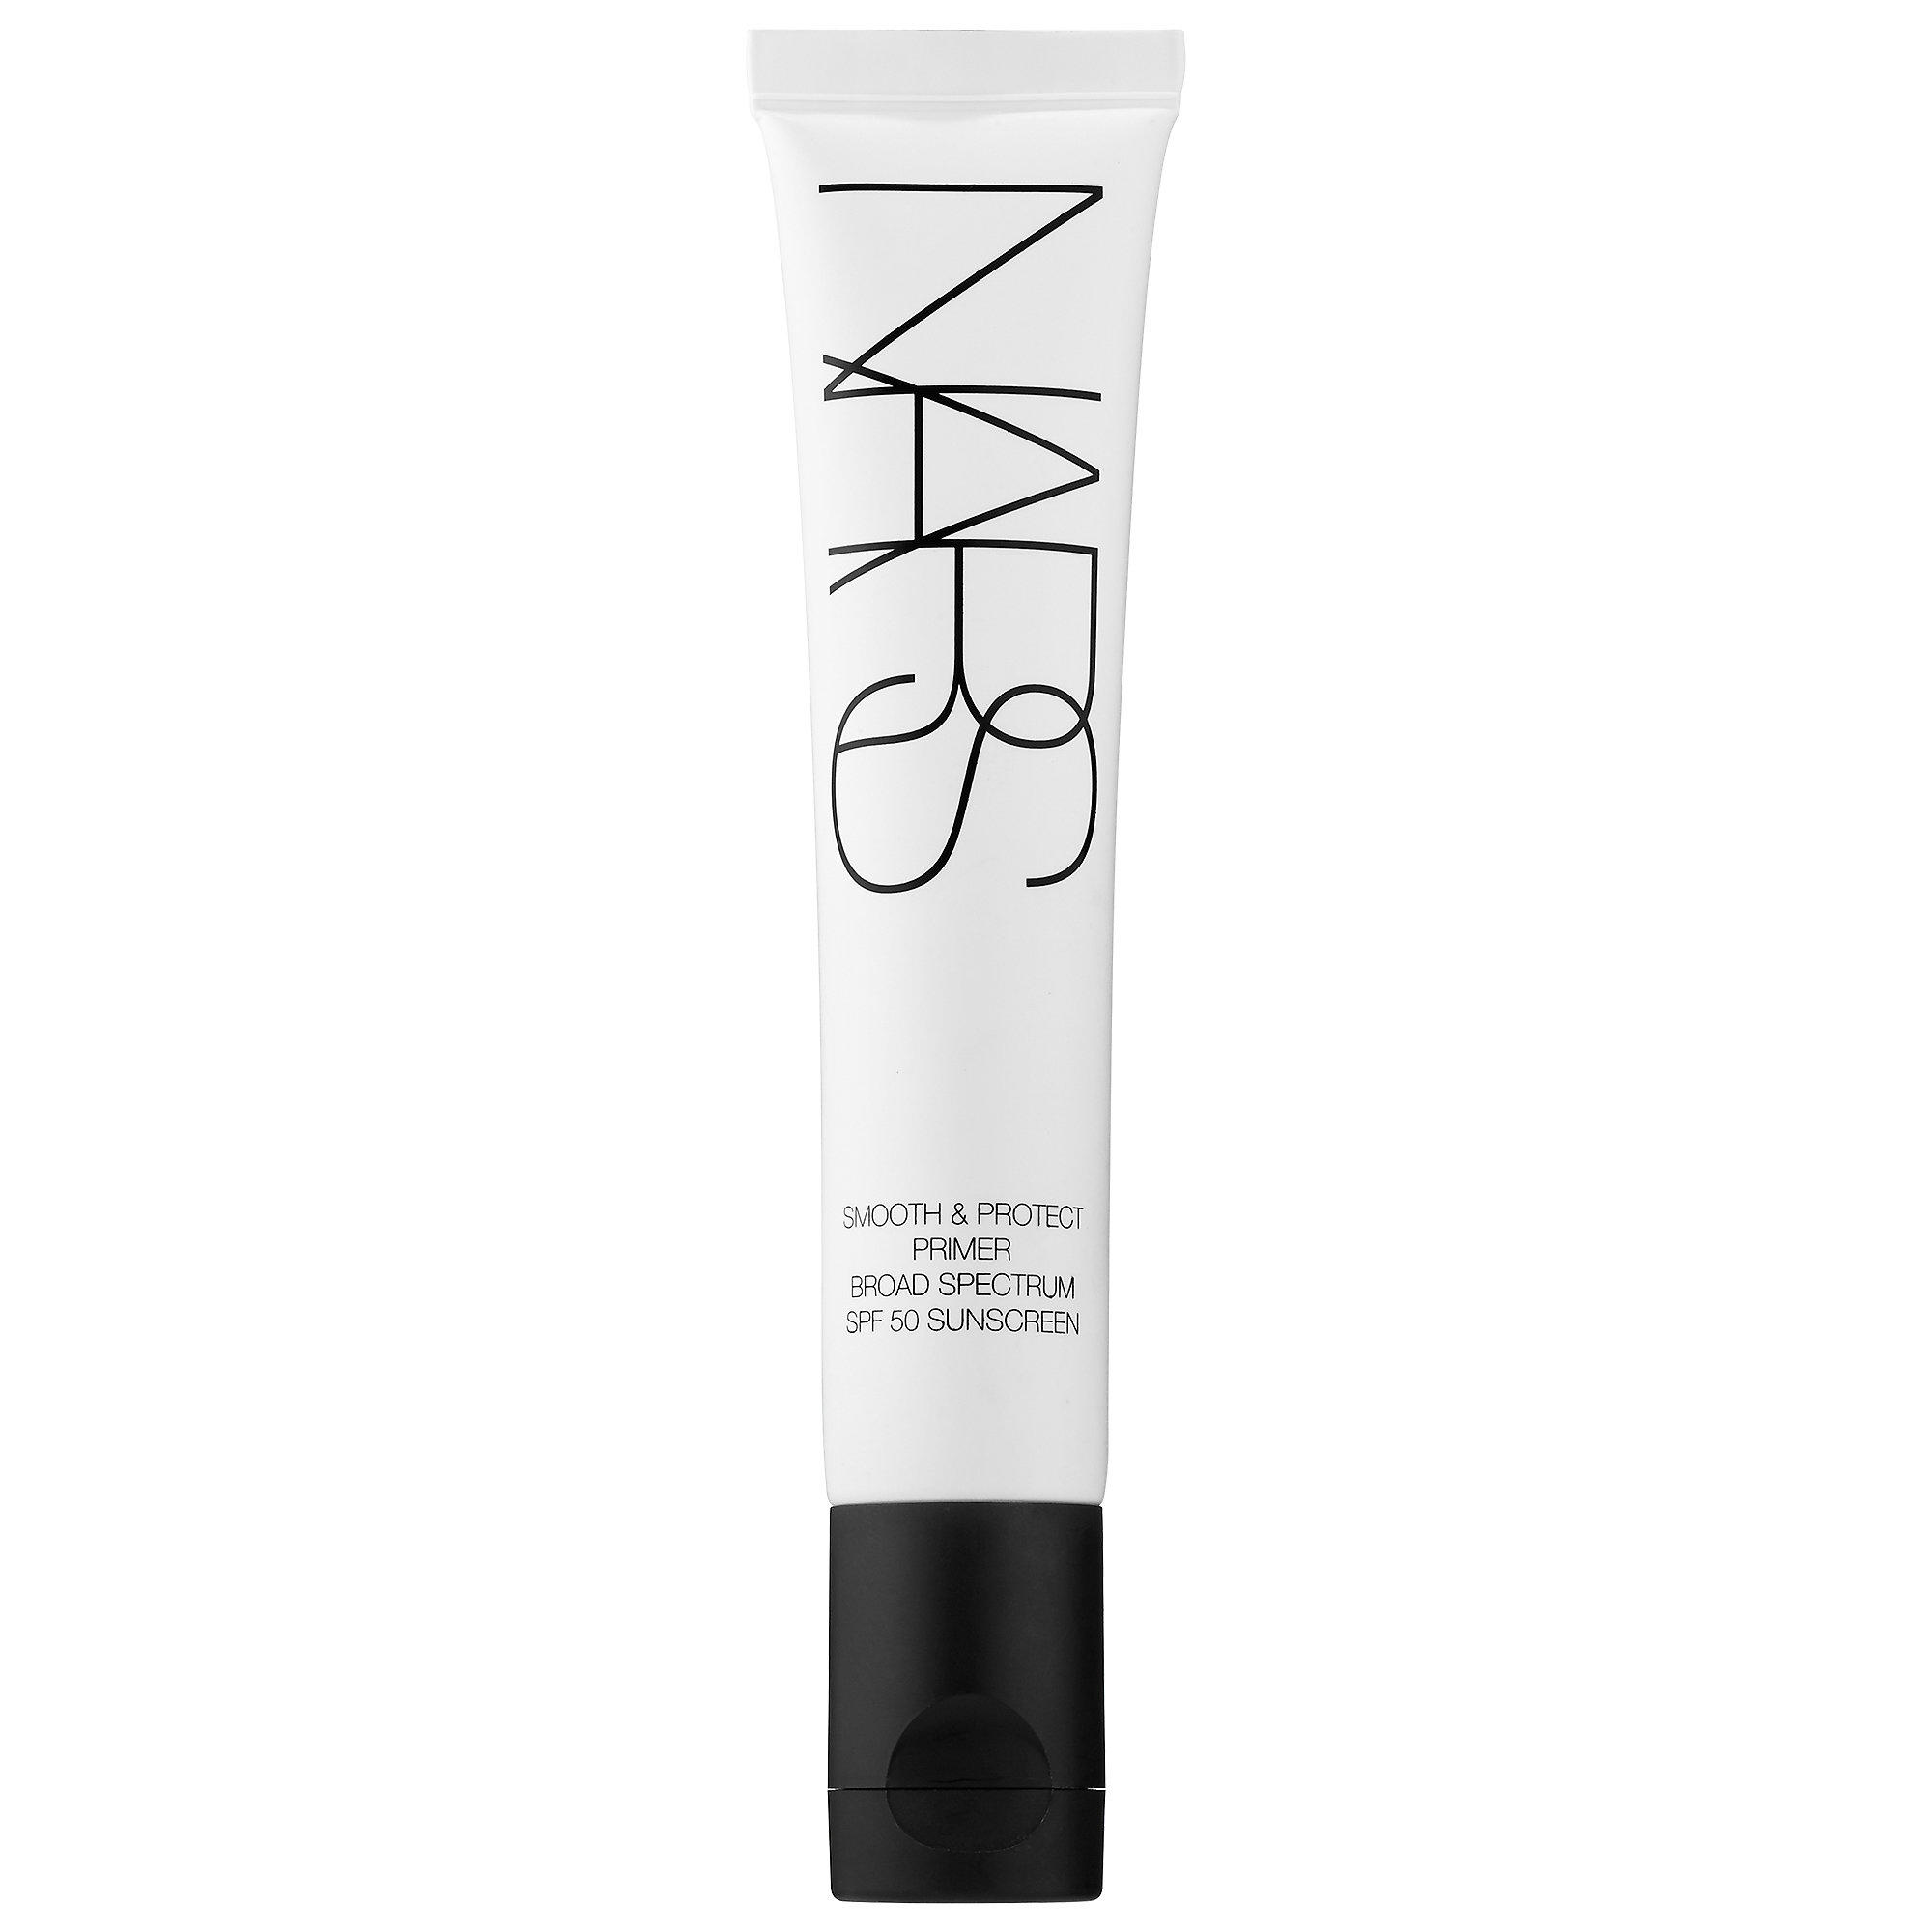 NARS Smooth & Protect Primer Broad Spectrum SPF 50 Sunscreen